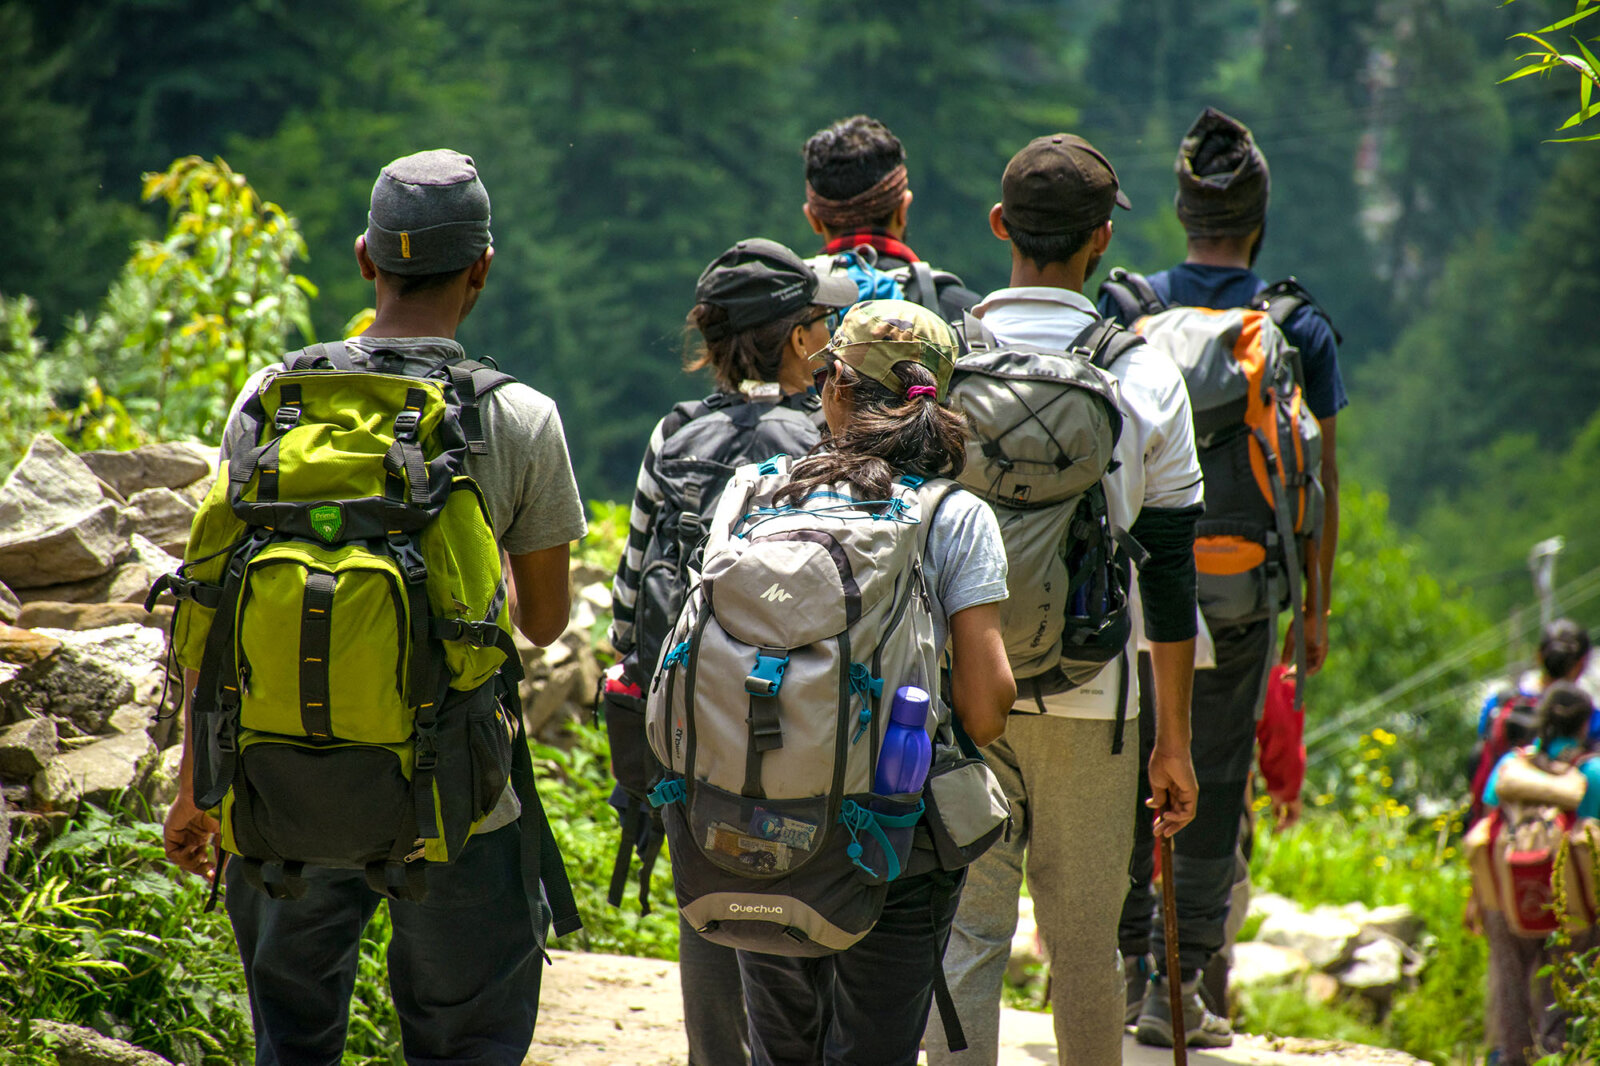 a group of people in hiking gear walking in a forest